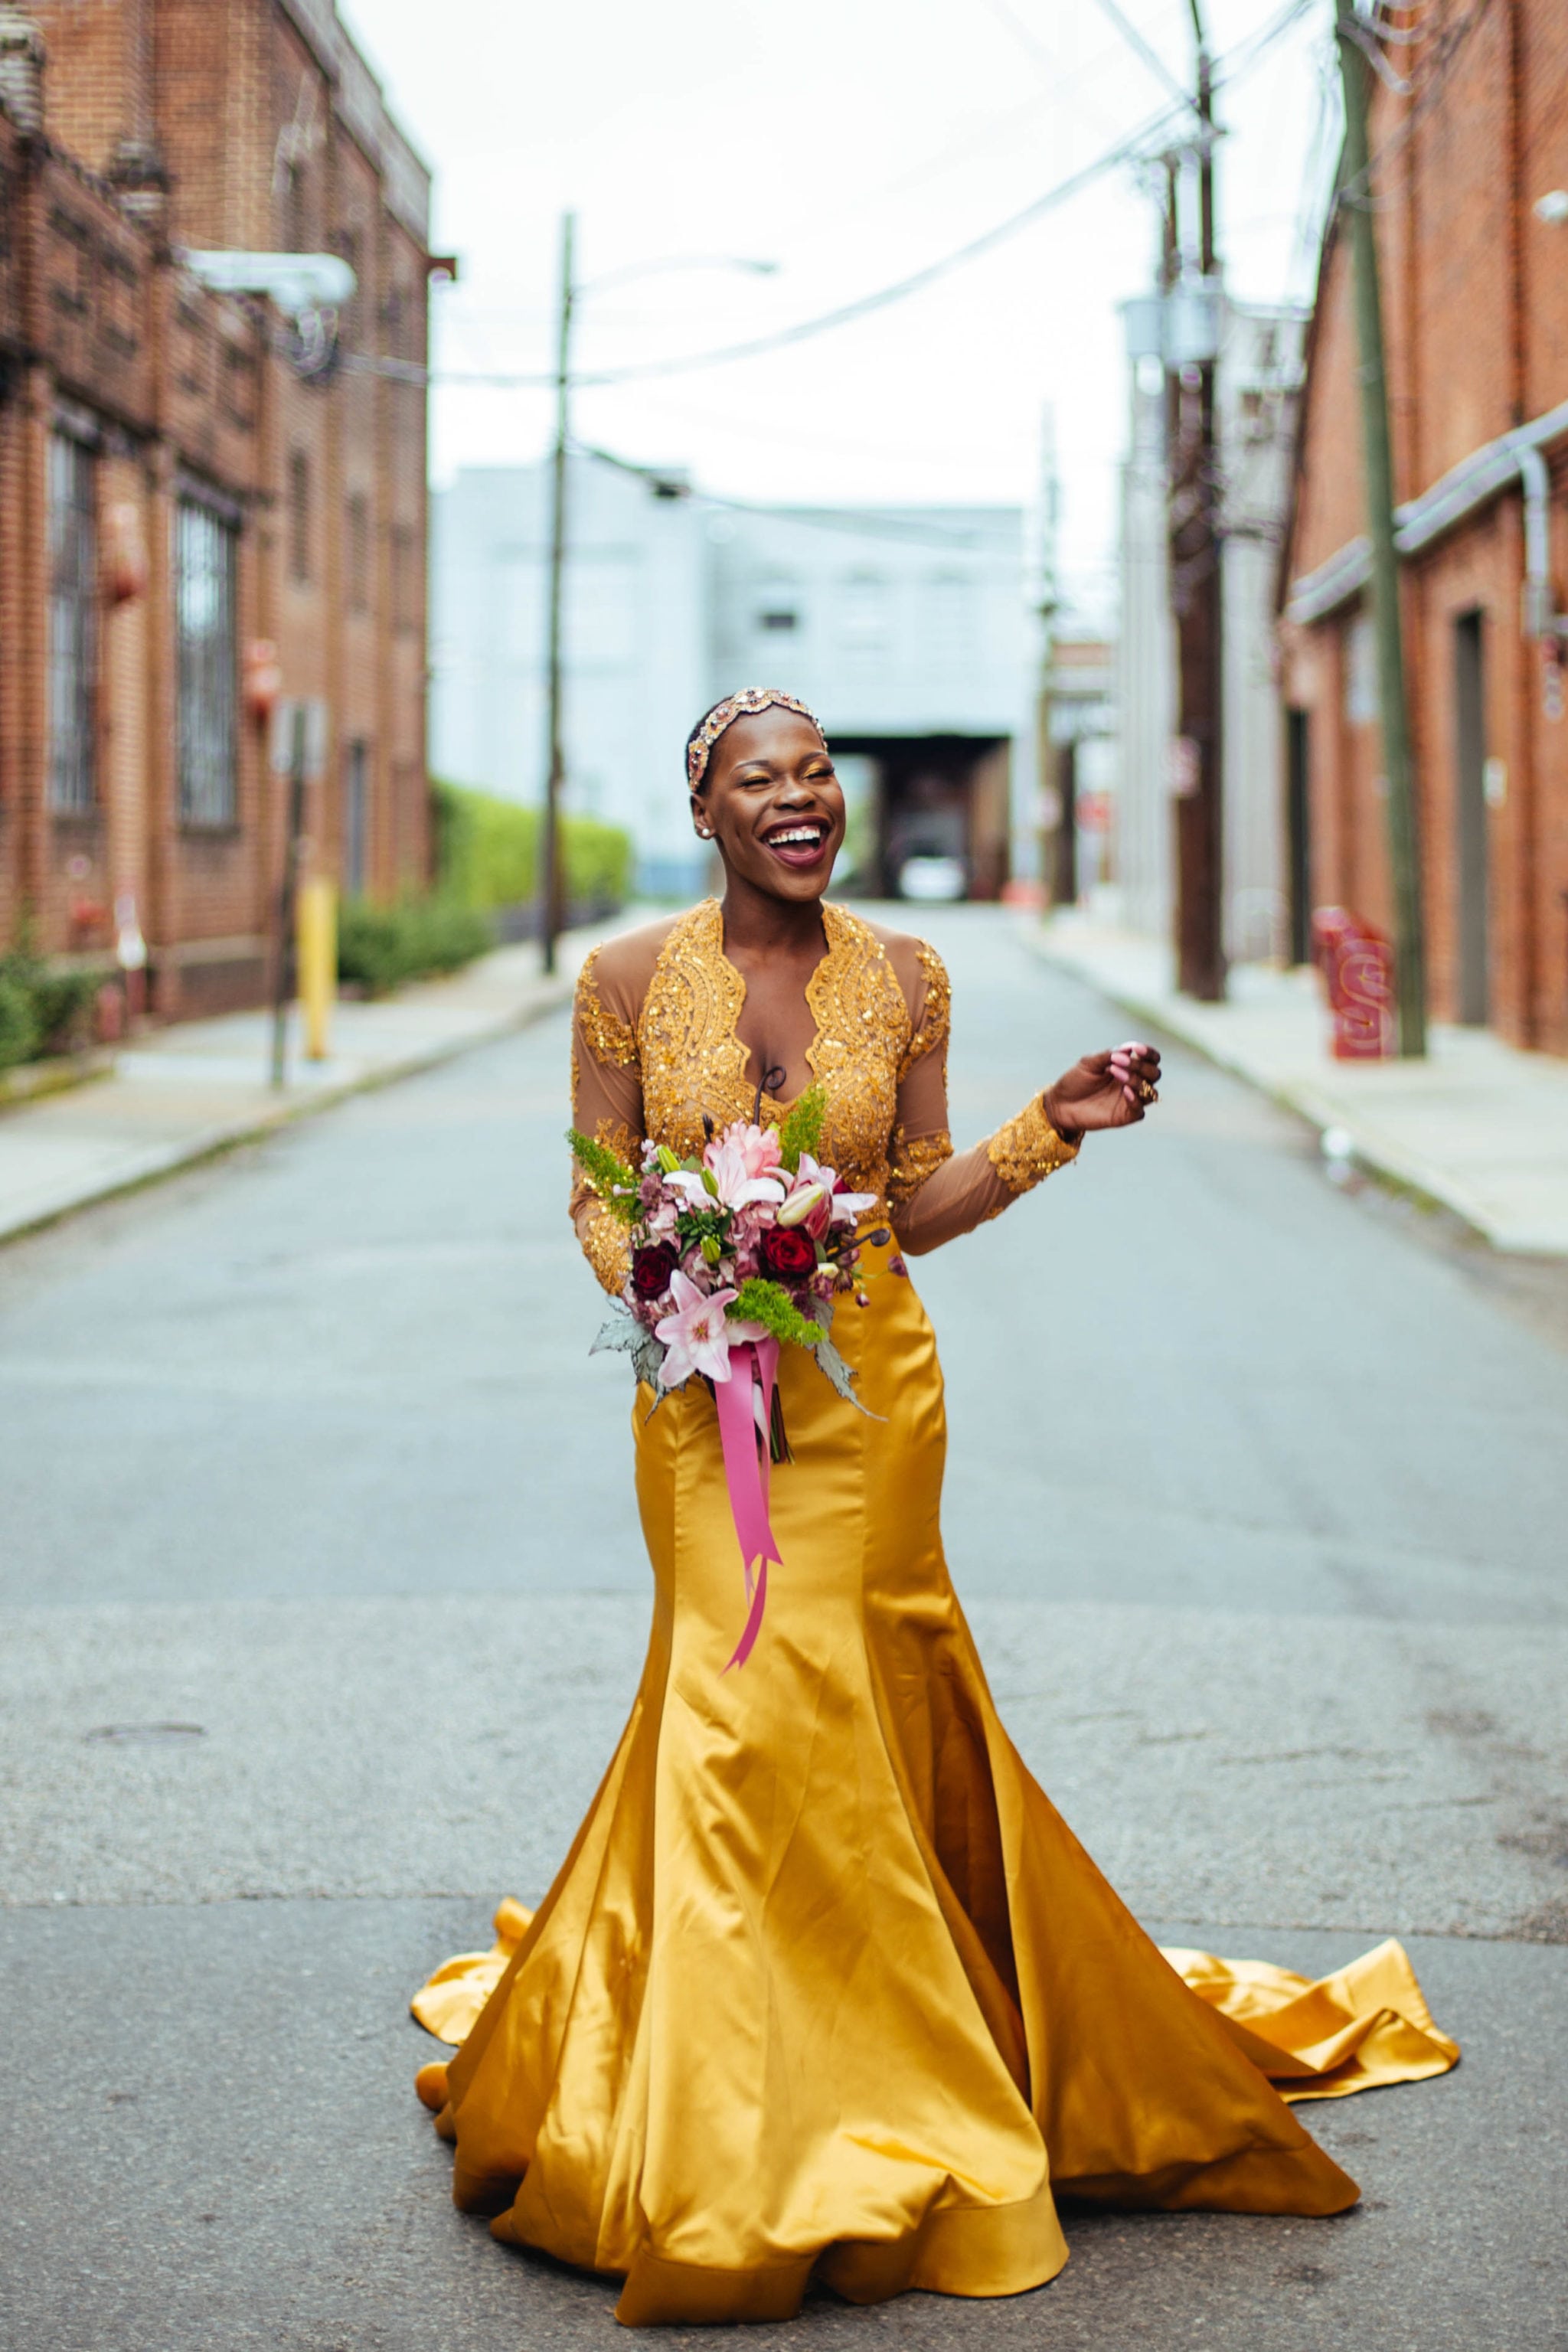 A strong woman stands in an alley wearing a golden dress, smiling, holding a bouquet